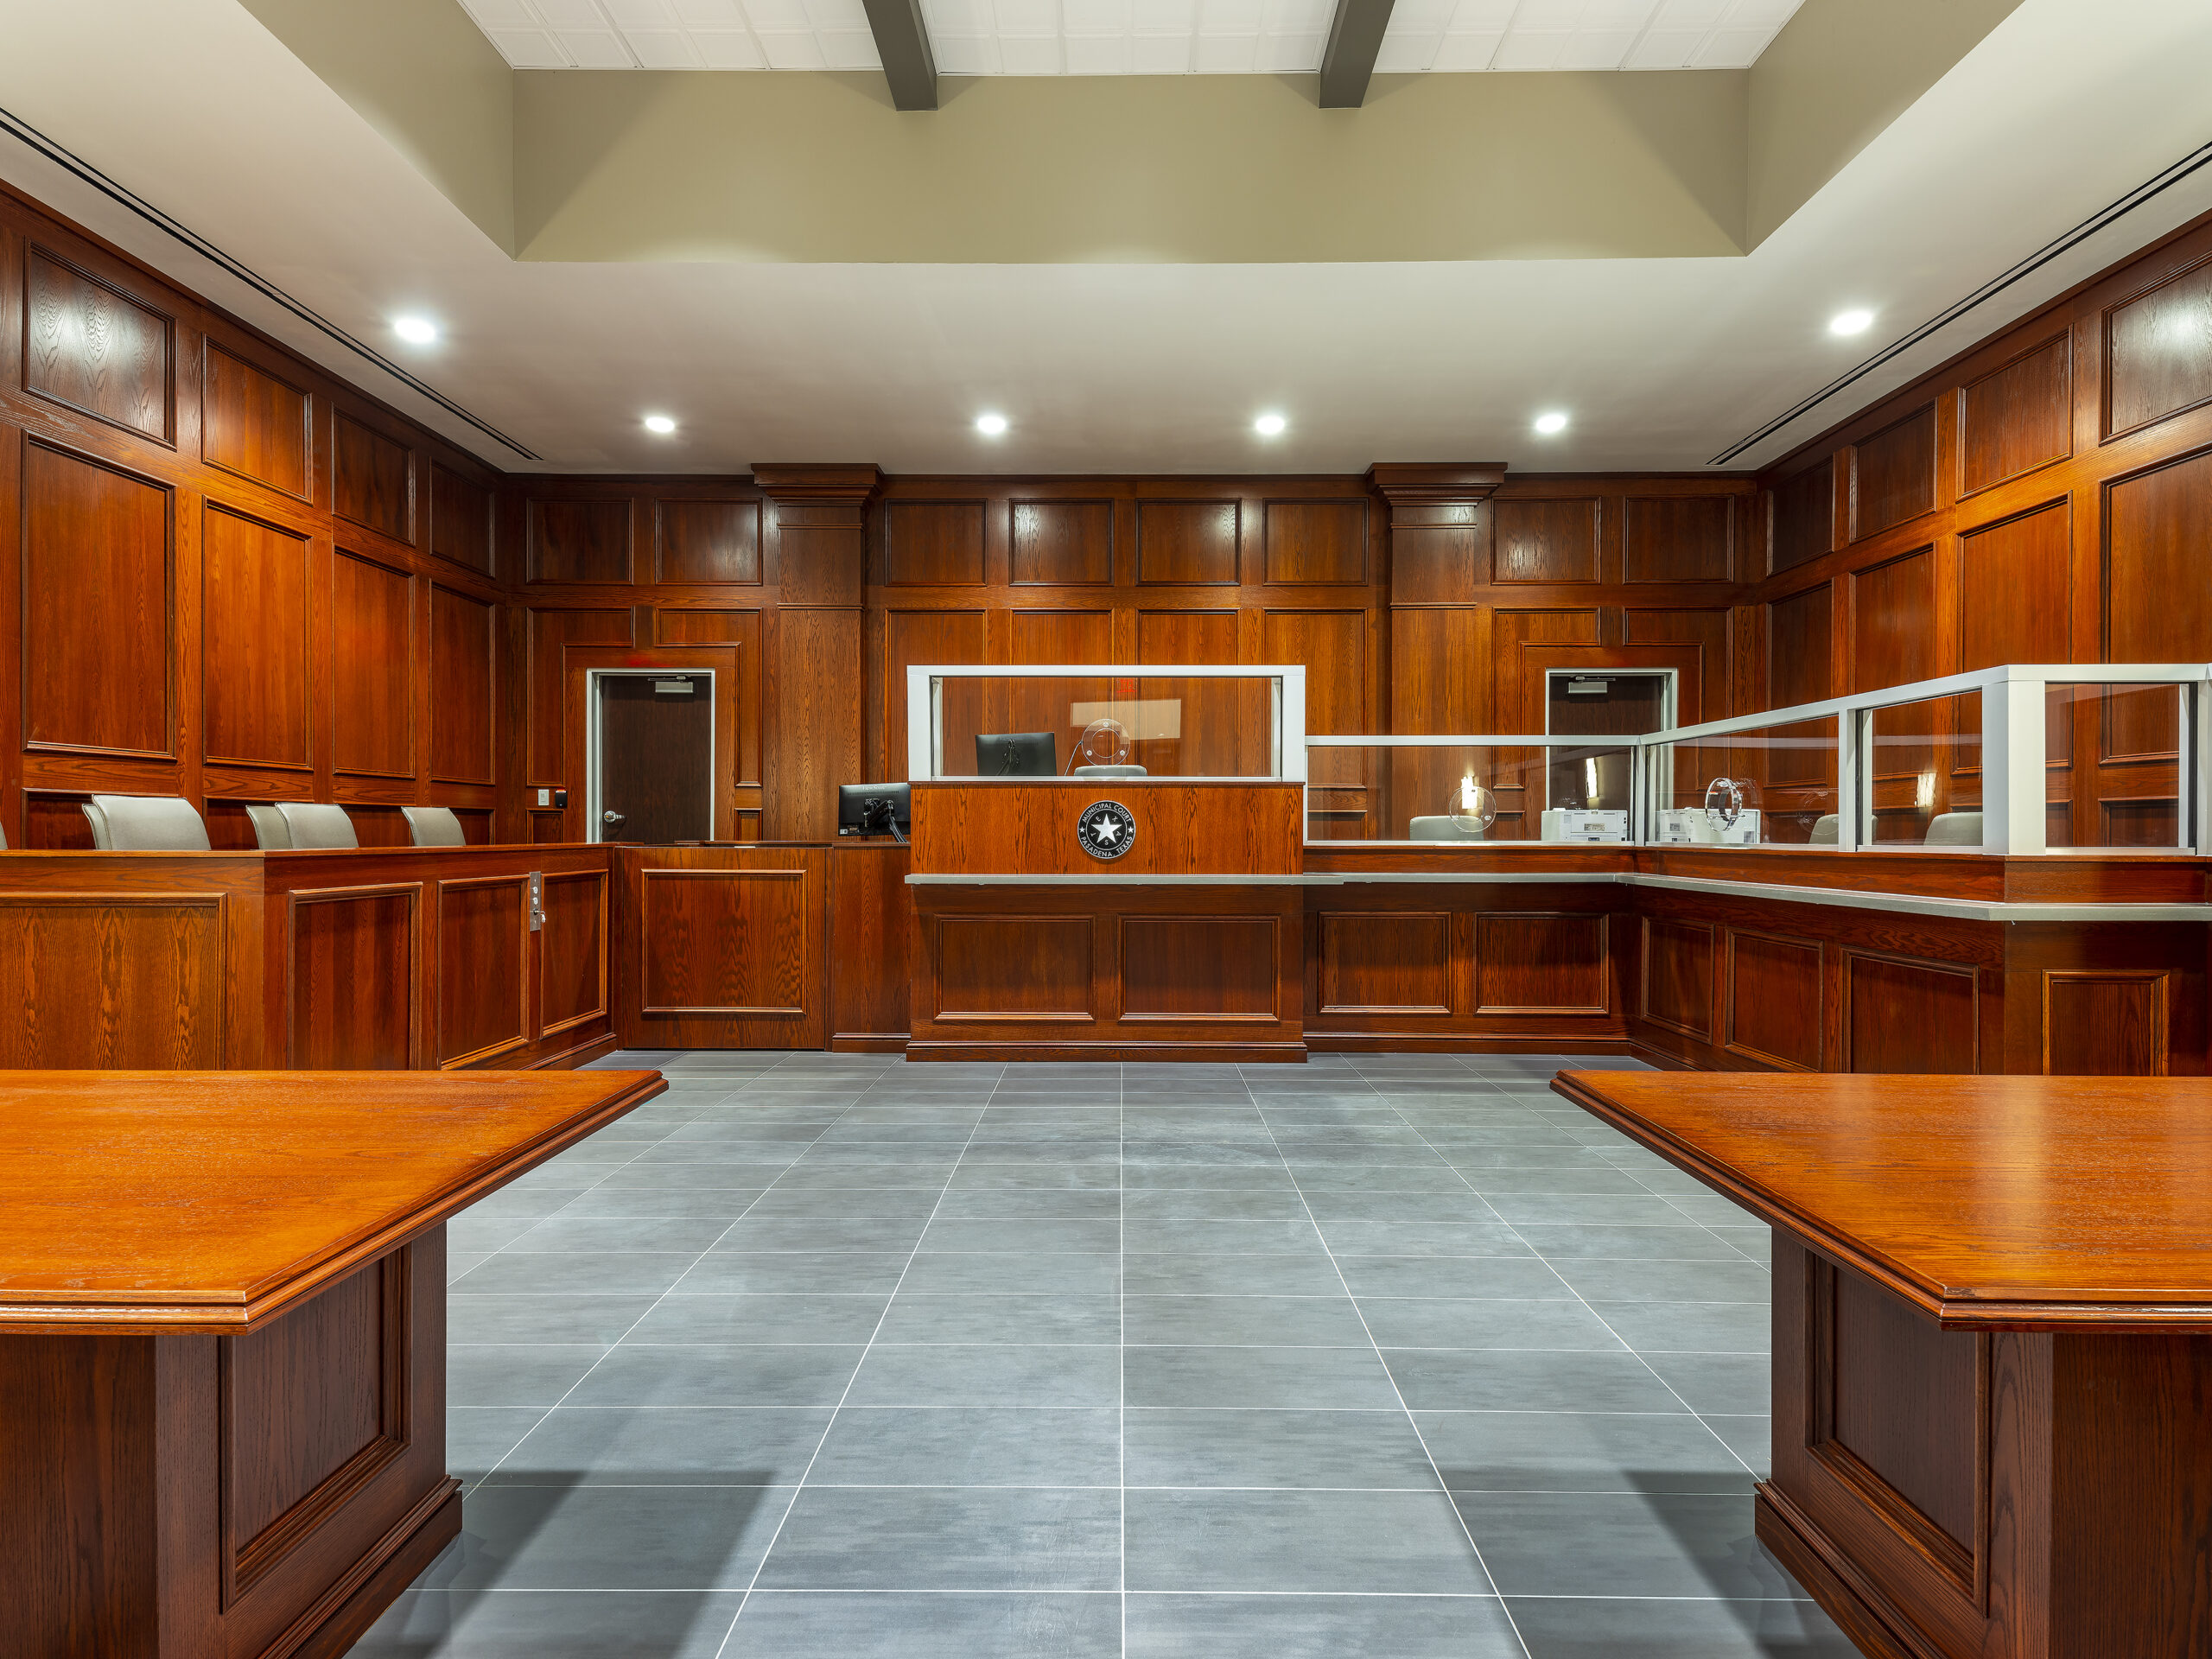 City Of Pasadena Munil Courthouse, Cabinets By Design Llc Duluth Ga